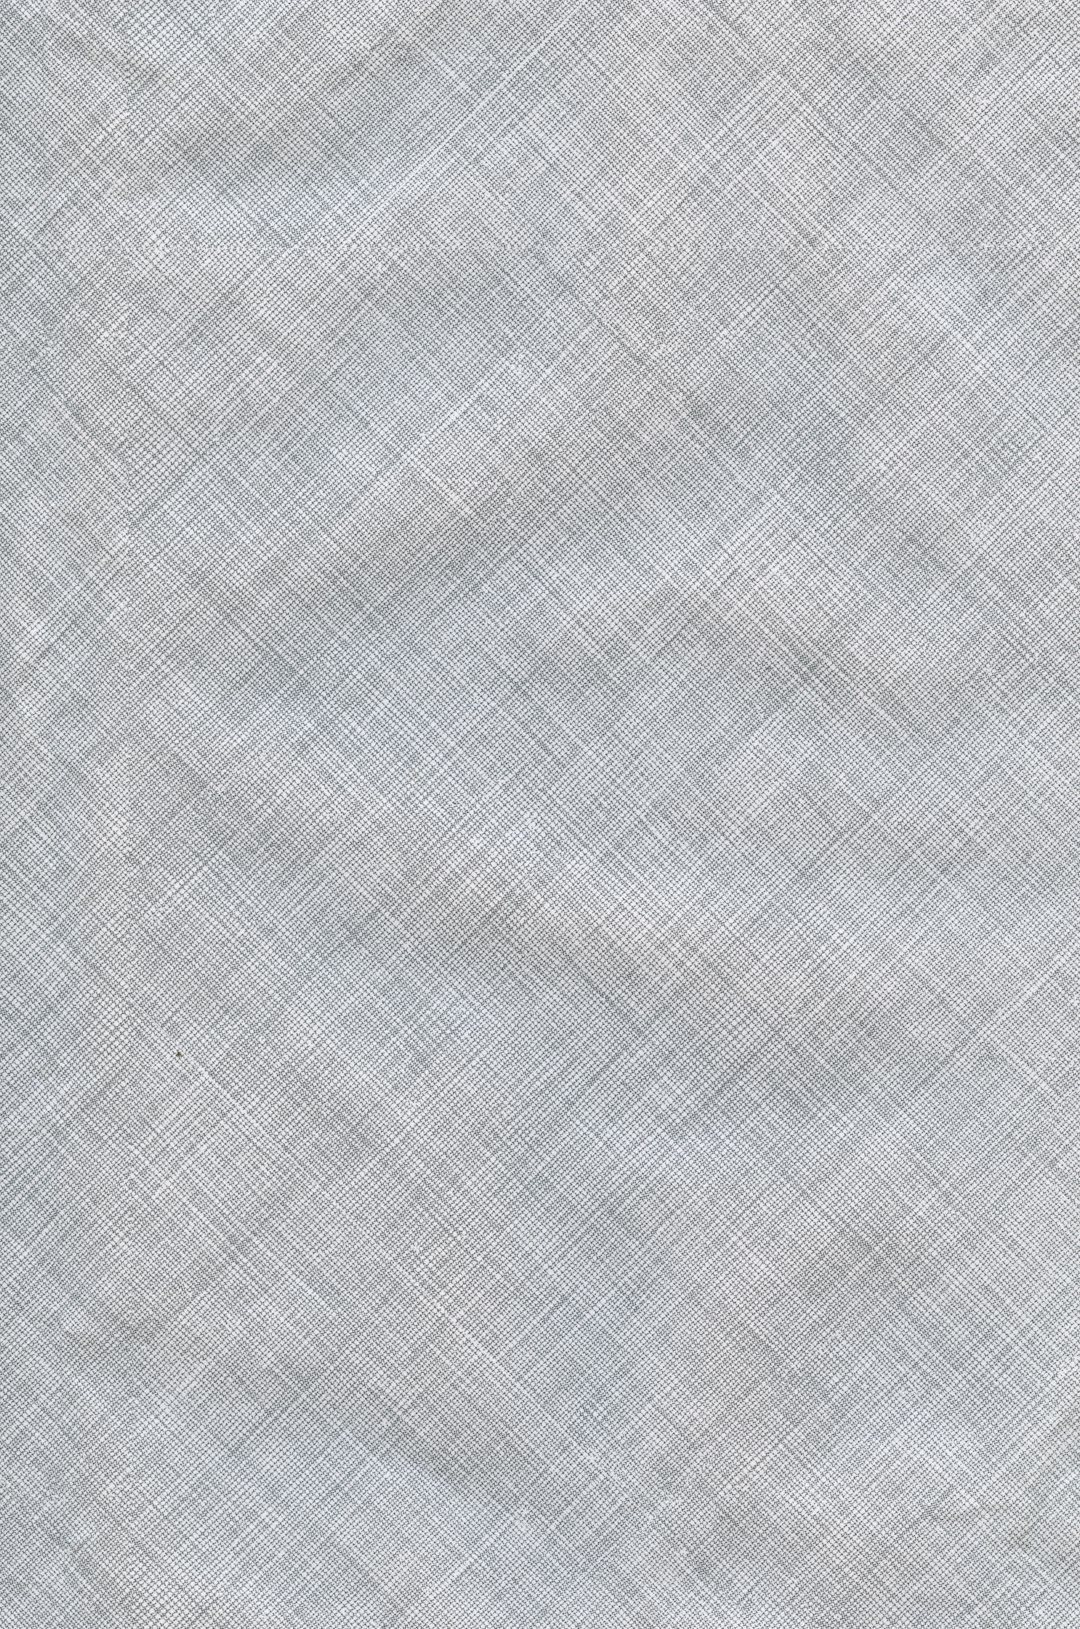 White gray linen texture background with a light grey crosshatch pattern for textile design, in the style of high resolution, no blur effect, no grainy textures, high quality, high detail, hyper realistic, hyper detailed, hyper colored –ar 21:32